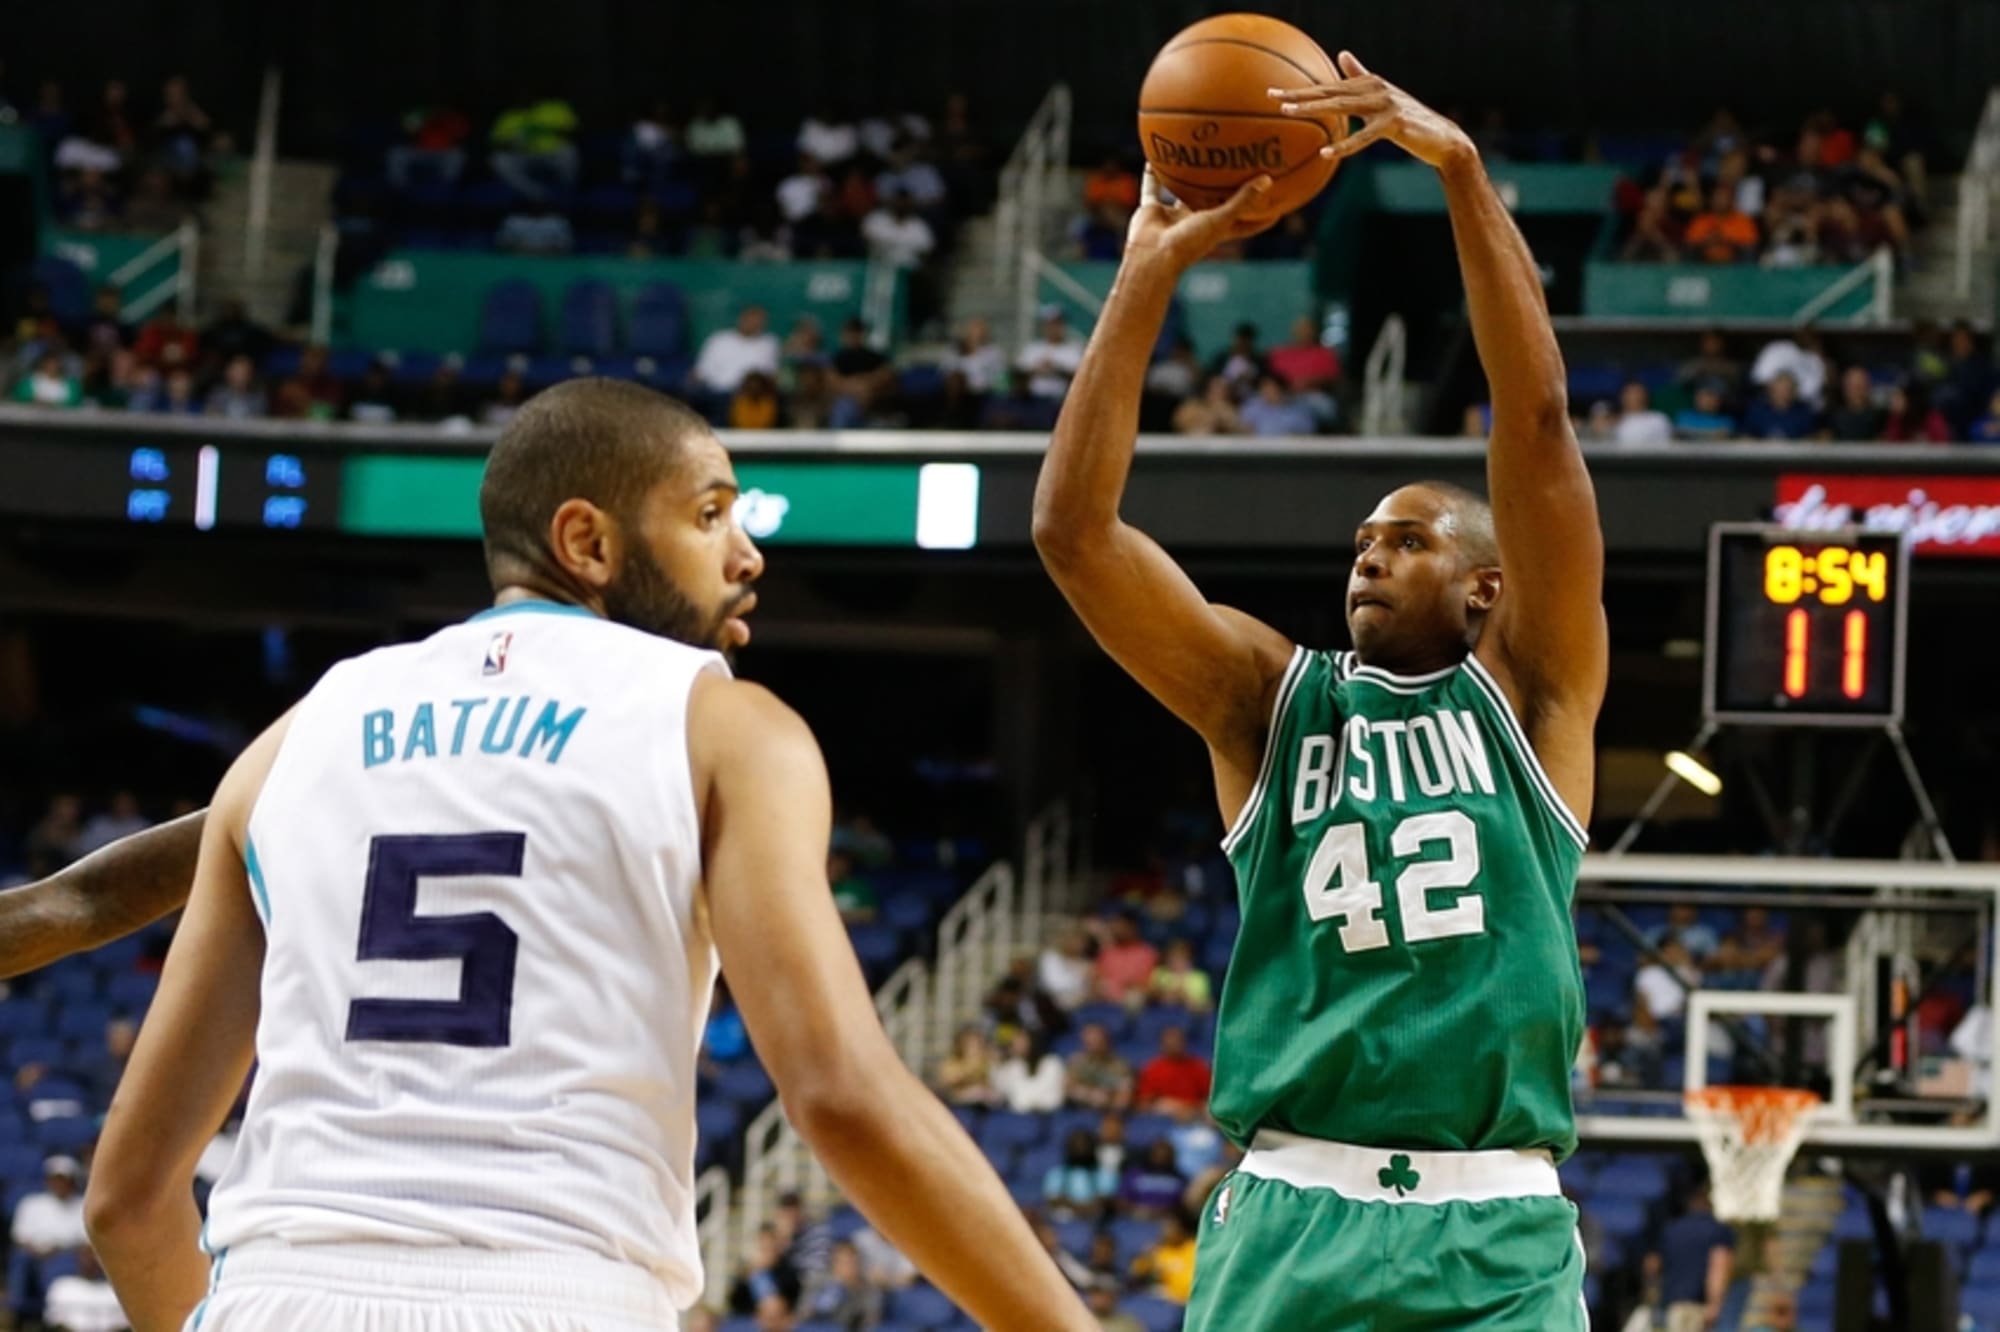 After first year, Al Horford embraces high expectations and pressure in  Boston – Boston Herald